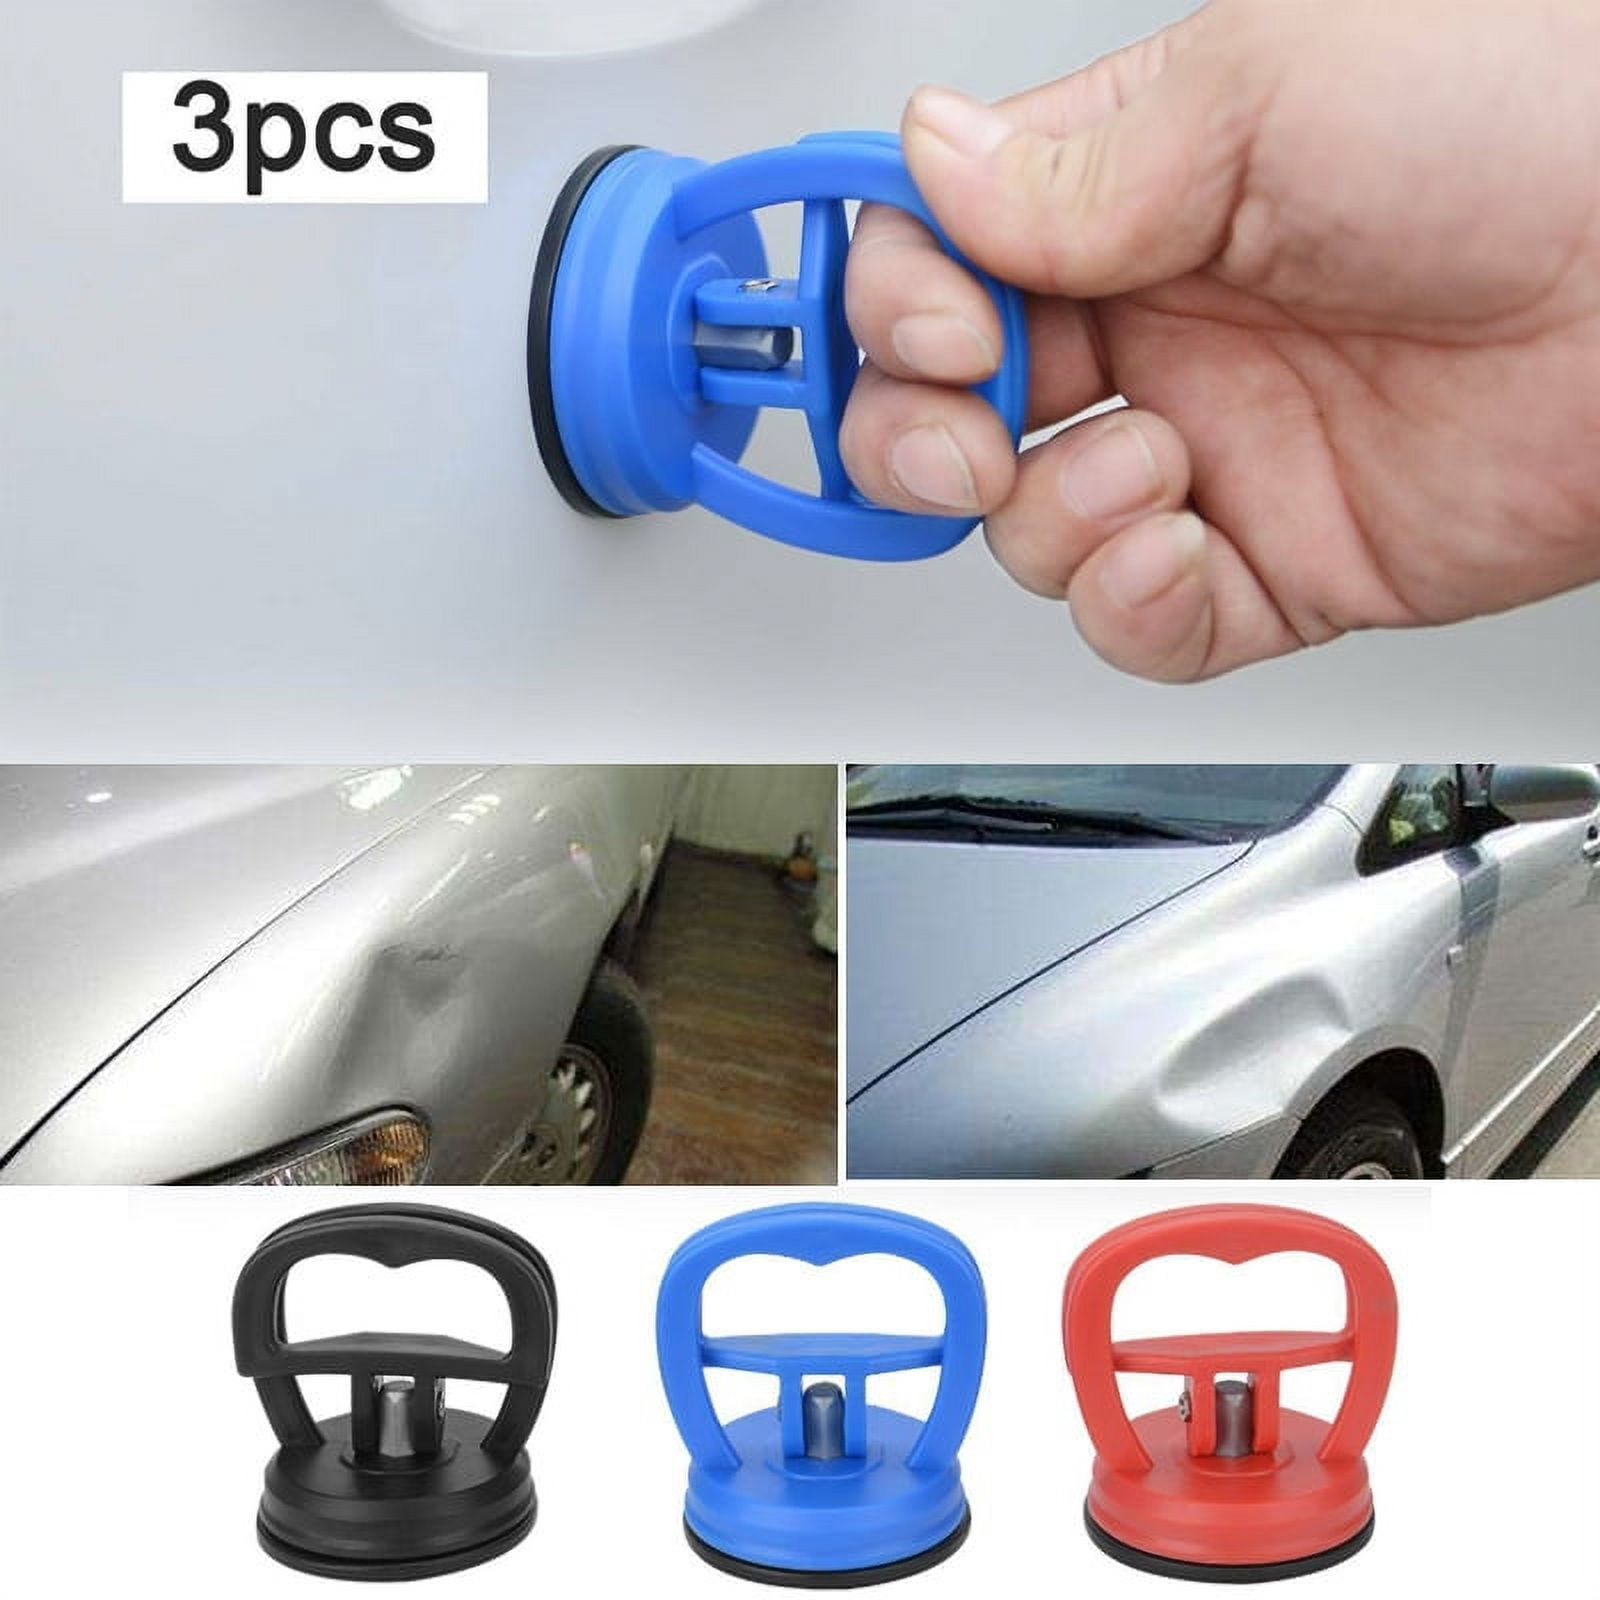 Dent Puller, 2 Pack Suction Cup Dent Puller, Powerful Car Dent Removal  Tools for Car Dent Repair, Glass, Screen, Tiles, Mirror & Objects Moving 